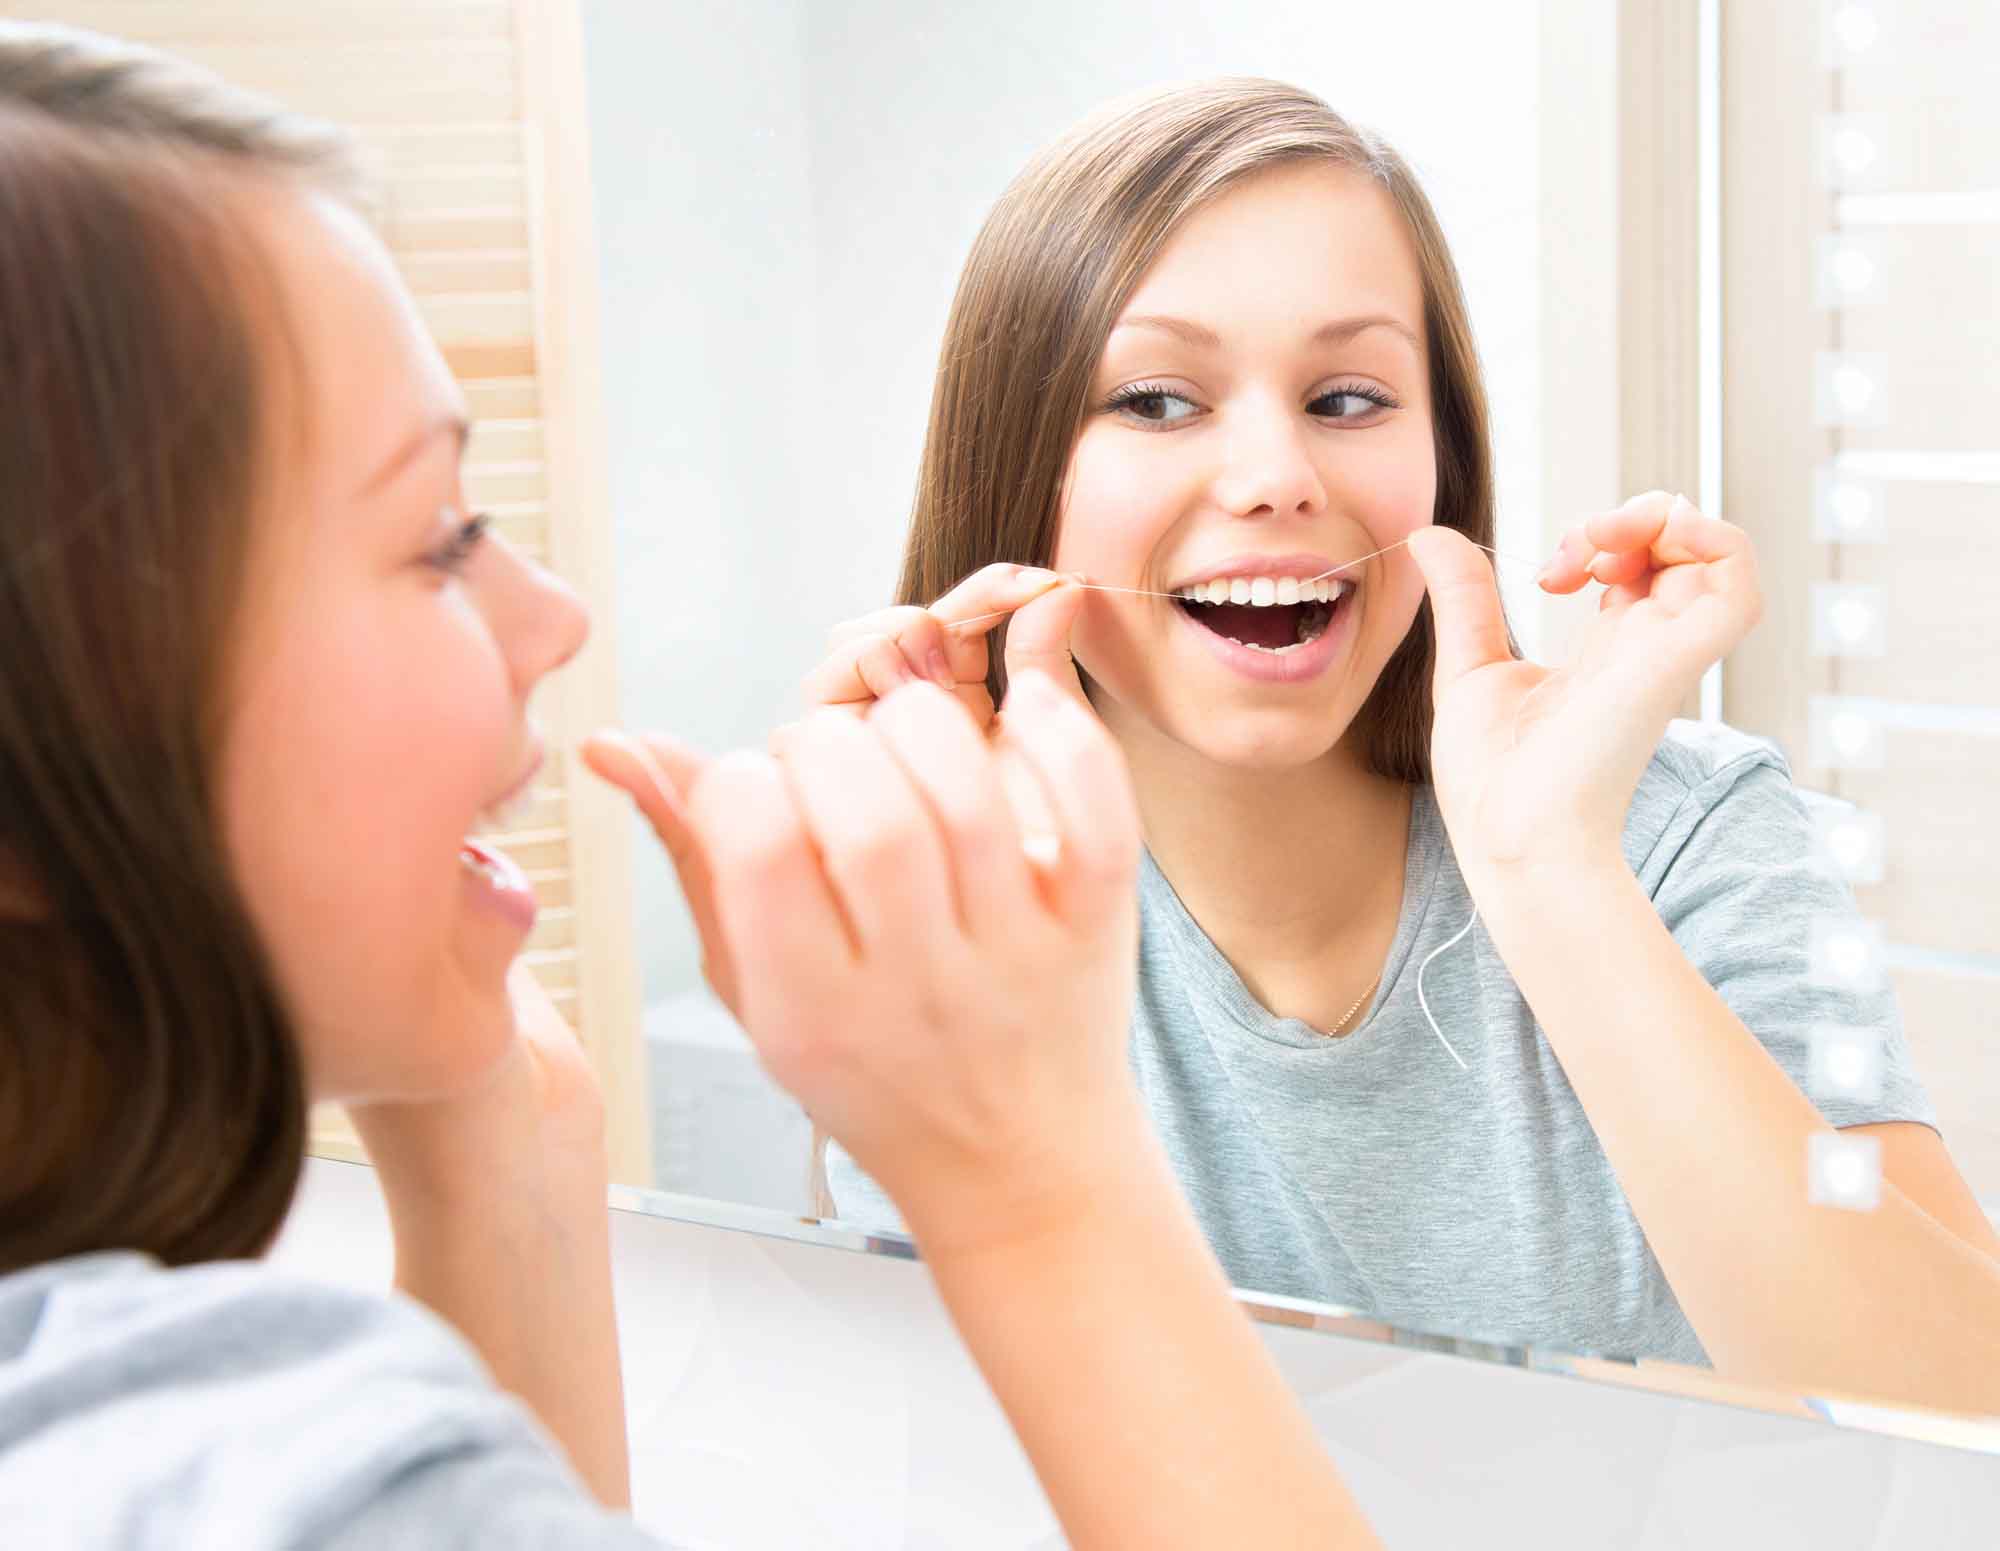 Oral Health - Brushing and Flossing